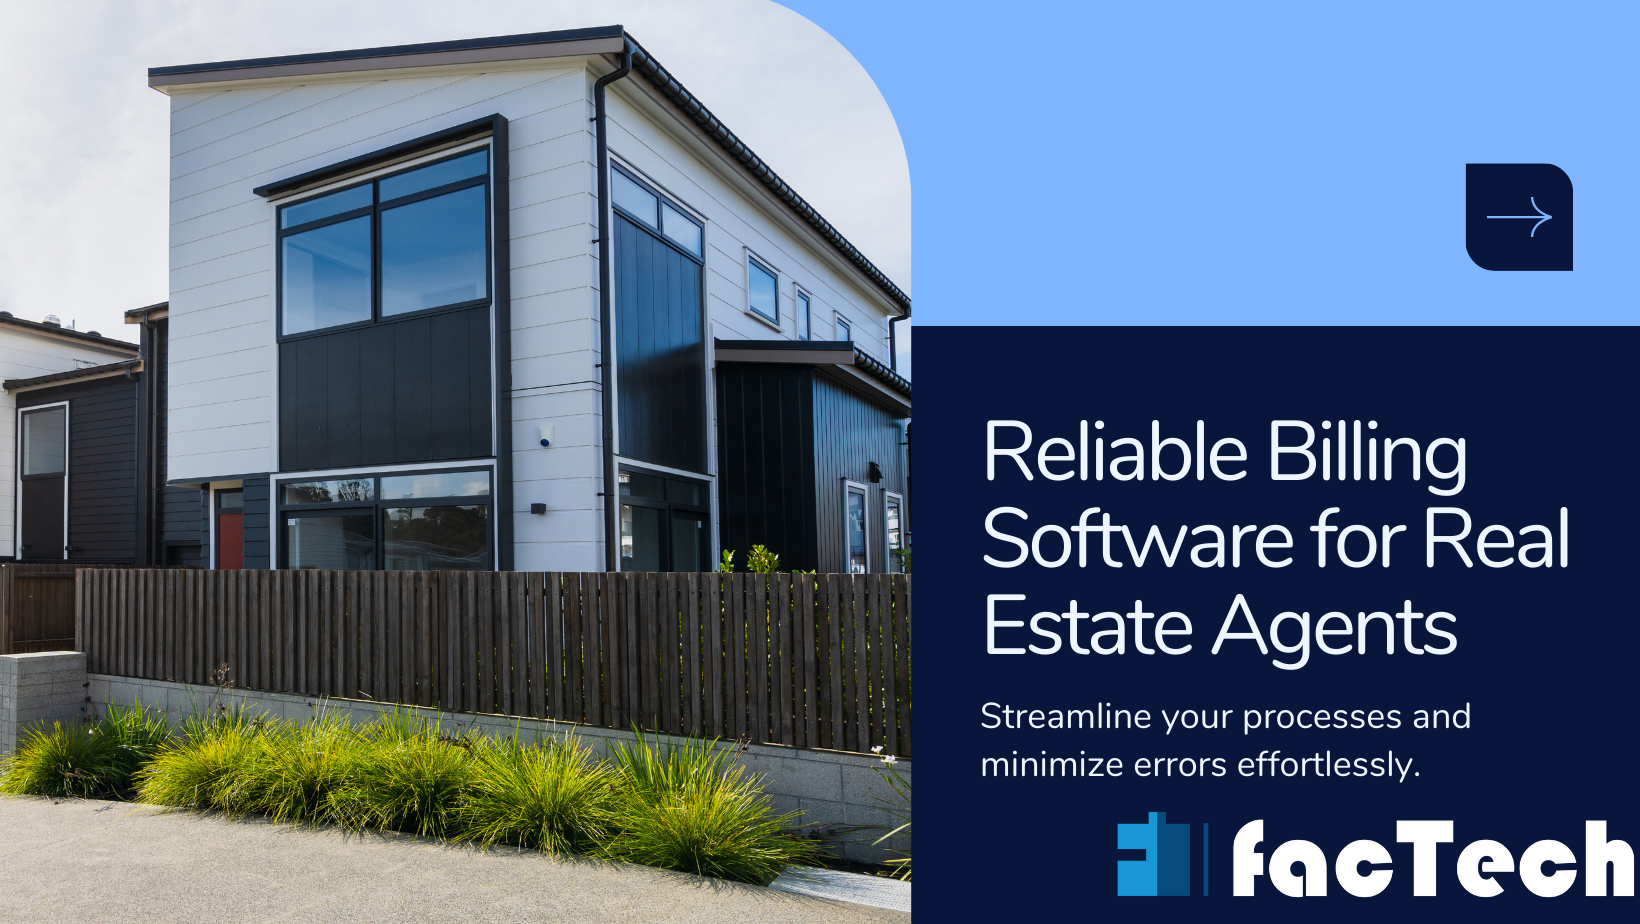 Reliable Billing Software for Real Estate Agents